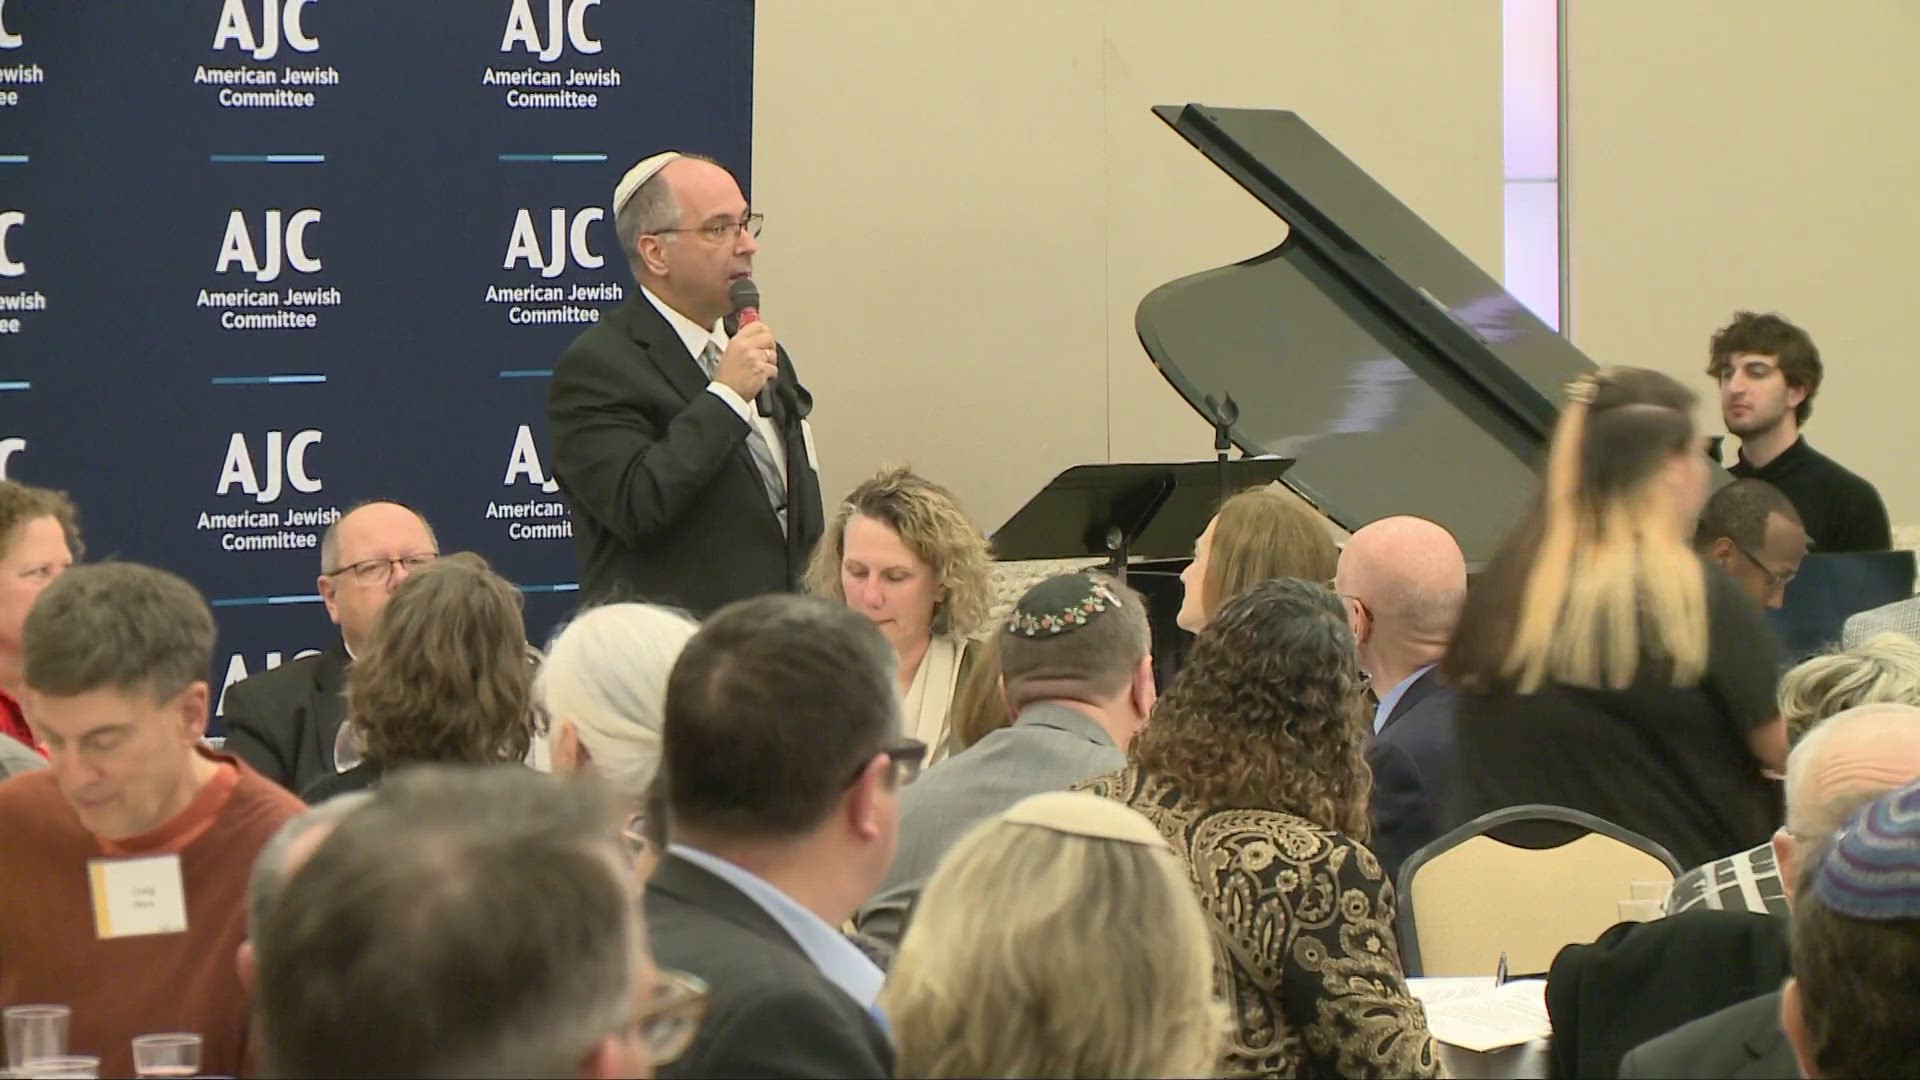 It's the first time in three years that the American Jewish Committee has been able to hold the event in person.